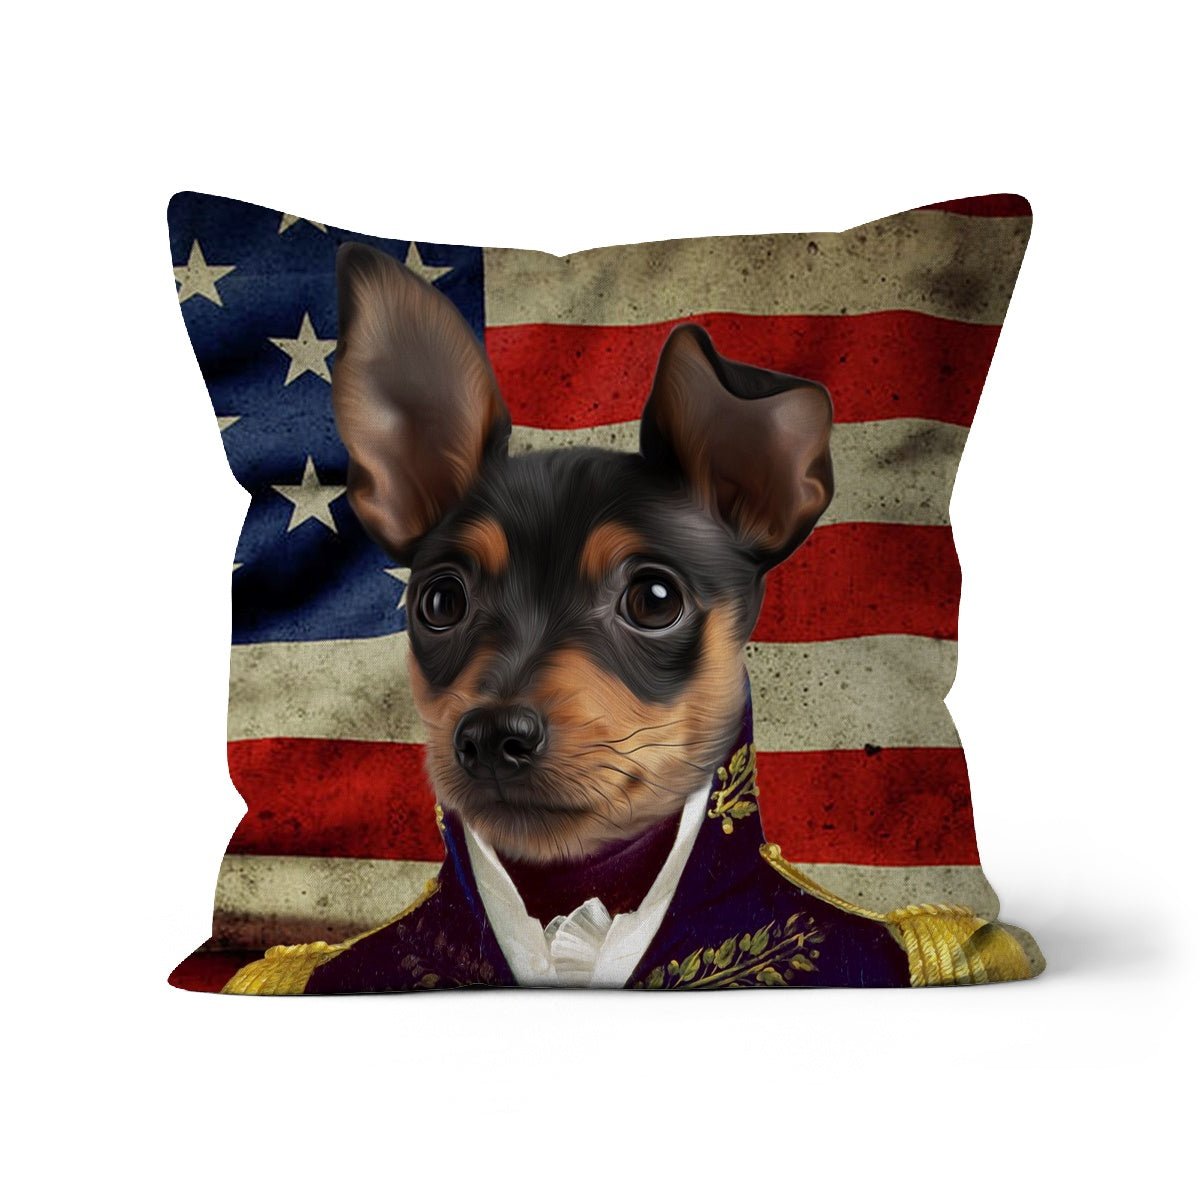 The General - USA Flag Edition: Custom Pet Cushion - Paw & Glory - #pet portraits# - #dog portraits# - #pet portraits uk#paw & glory, pet portraits pillow,dog pillow custom, custom pet pillows, pup pillows, pillow with dogs face, dog pillow cases